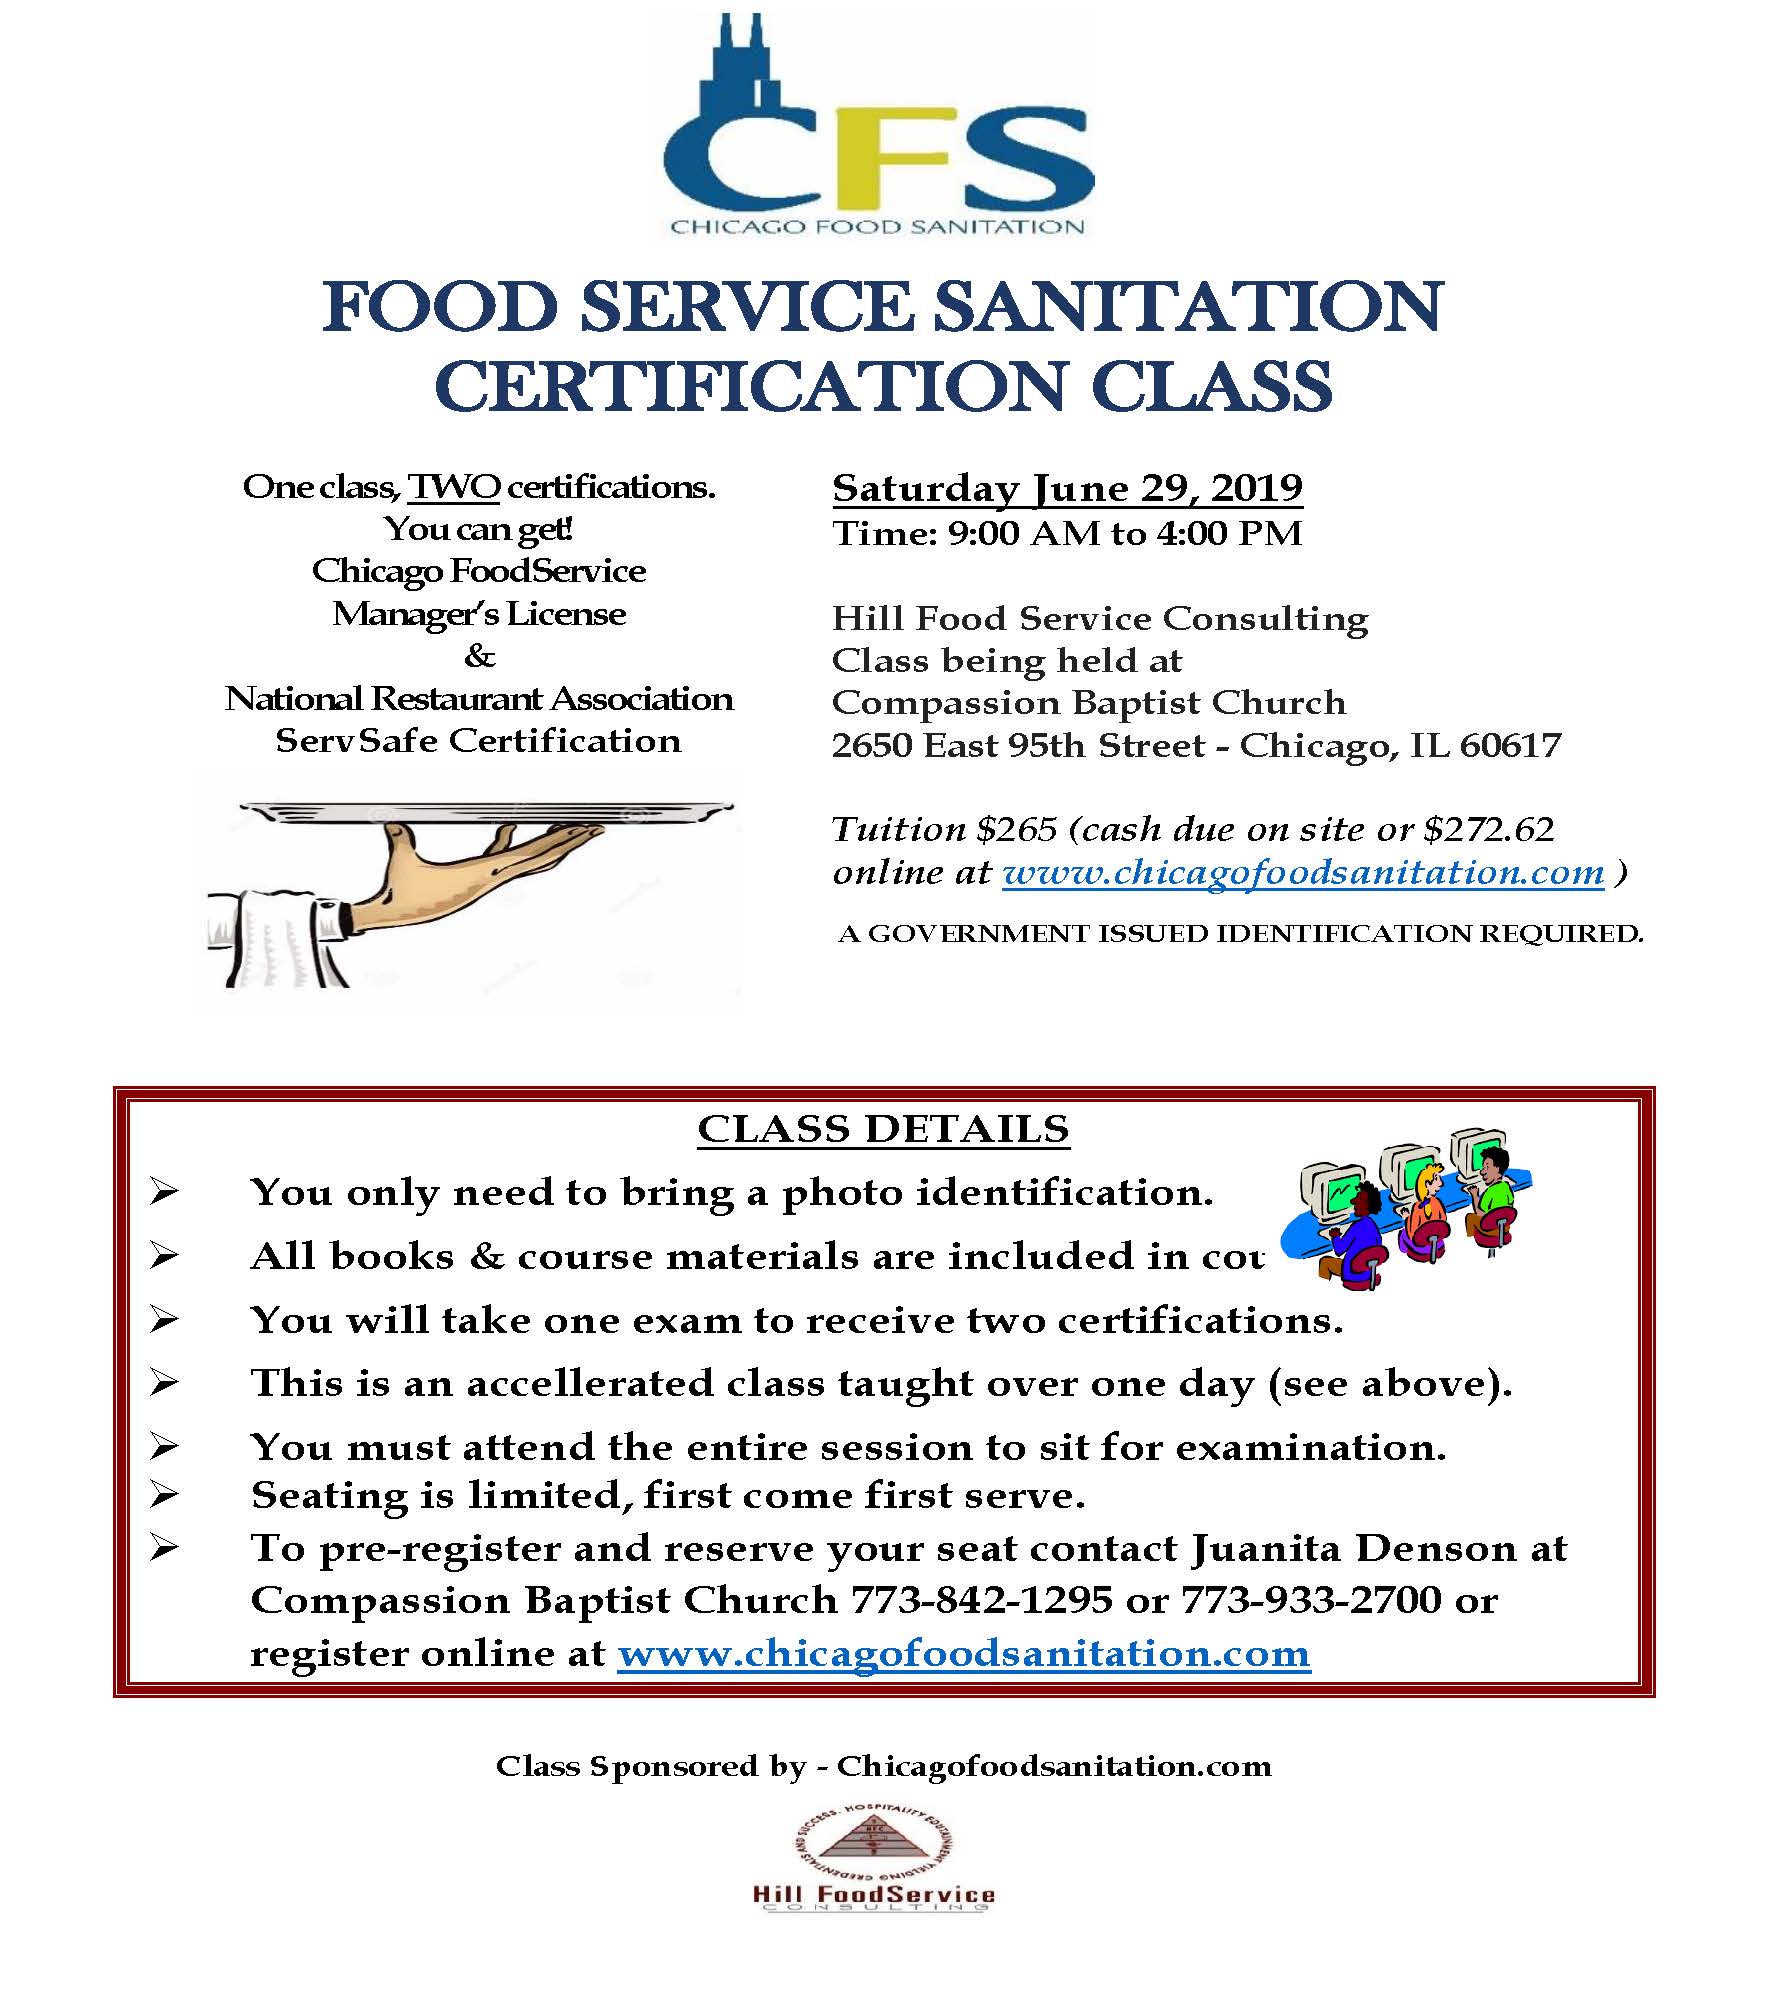 Food Service Sanitation Certification Class State Rep Marcus Evans